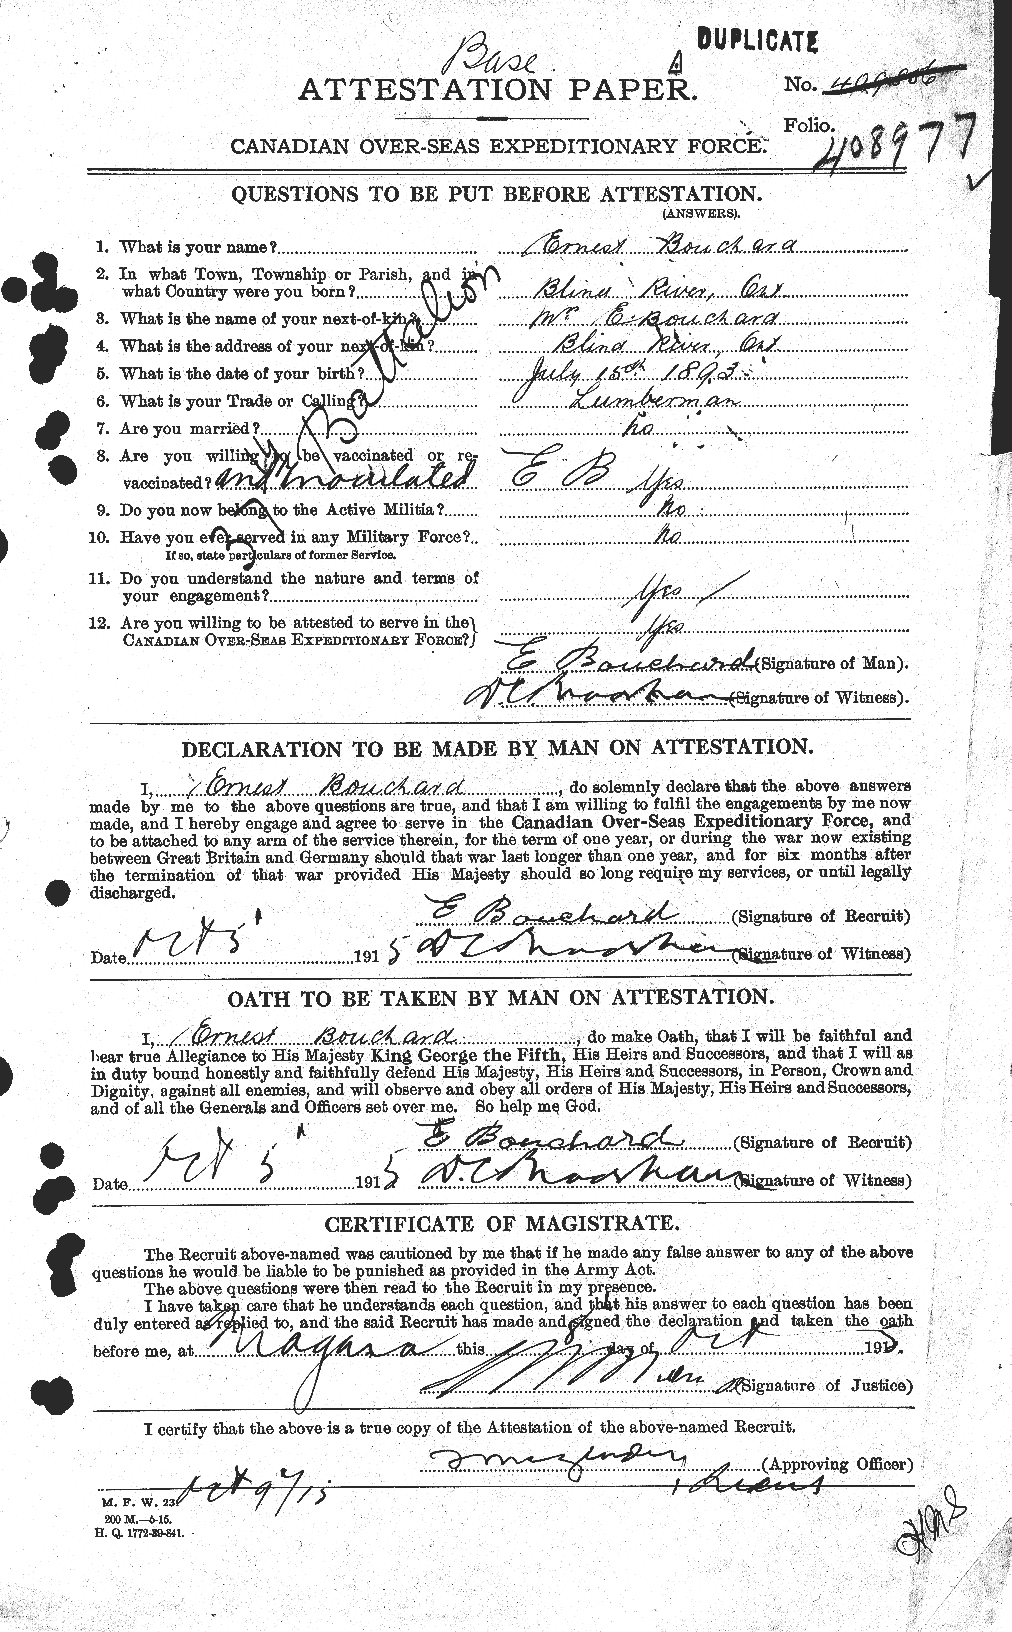 Personnel Records of the First World War - CEF 254795a